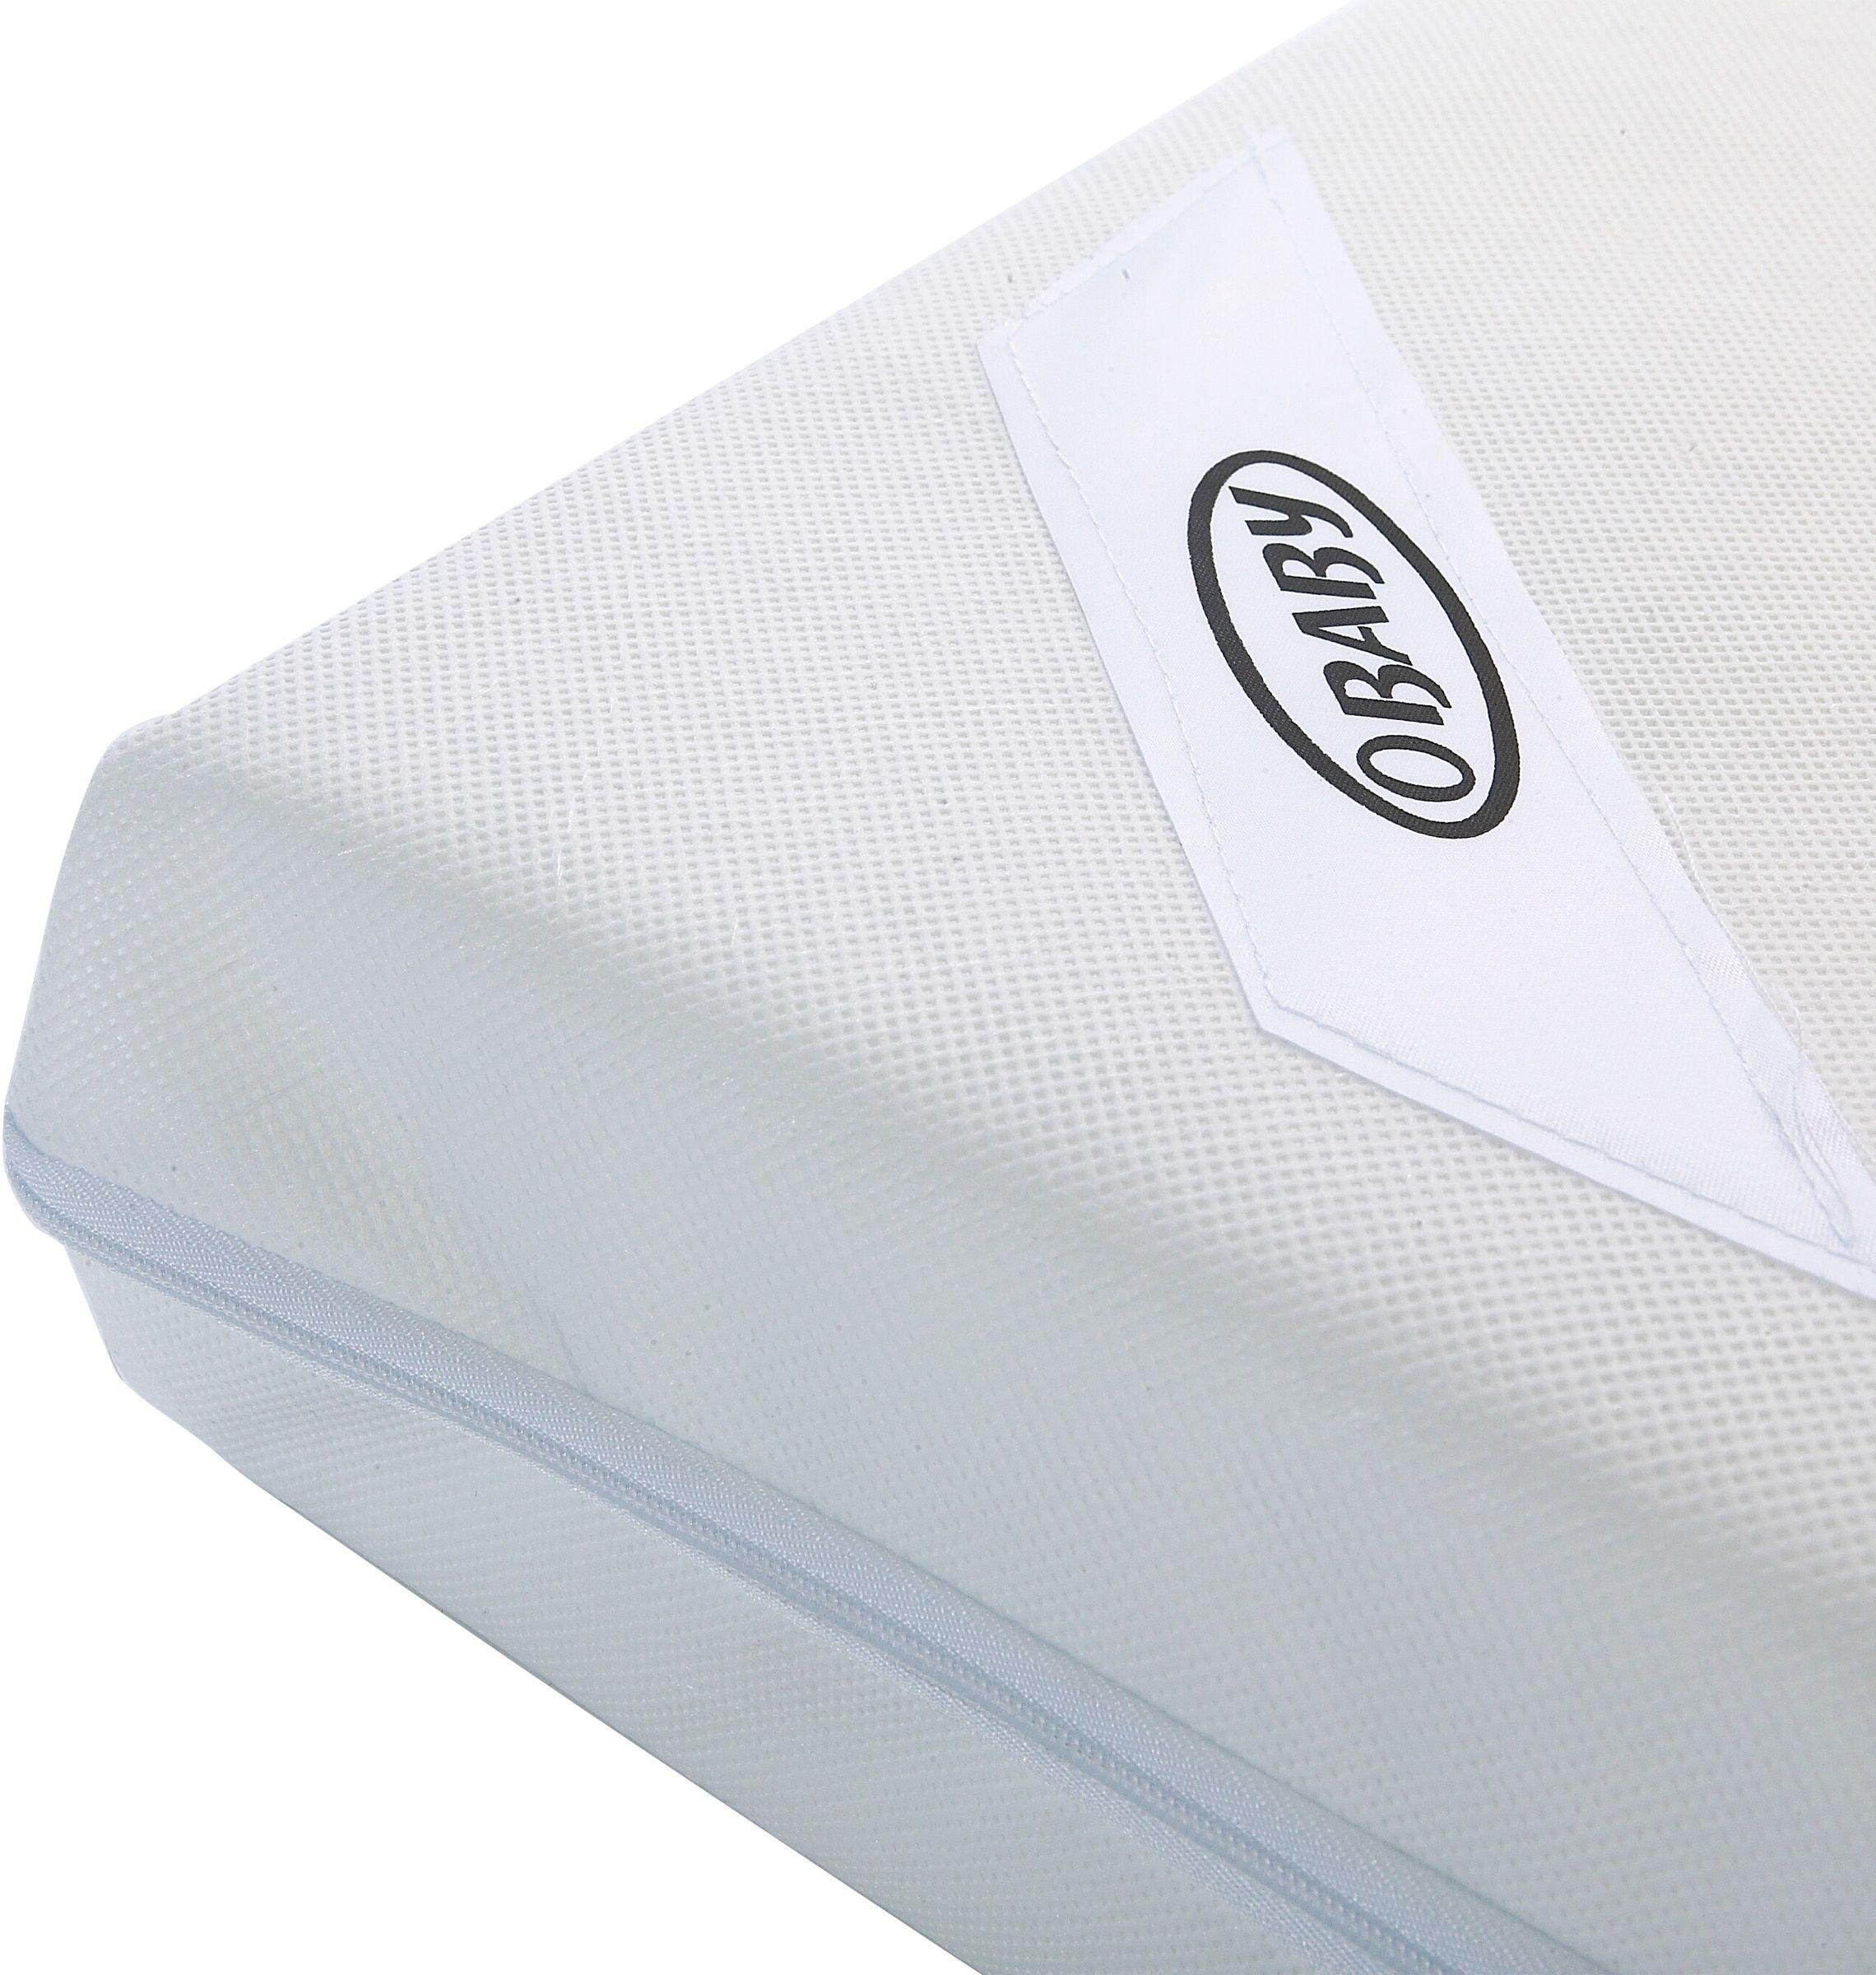 Obaby 140 x 70cm Foam Cot Bed Mattress Review